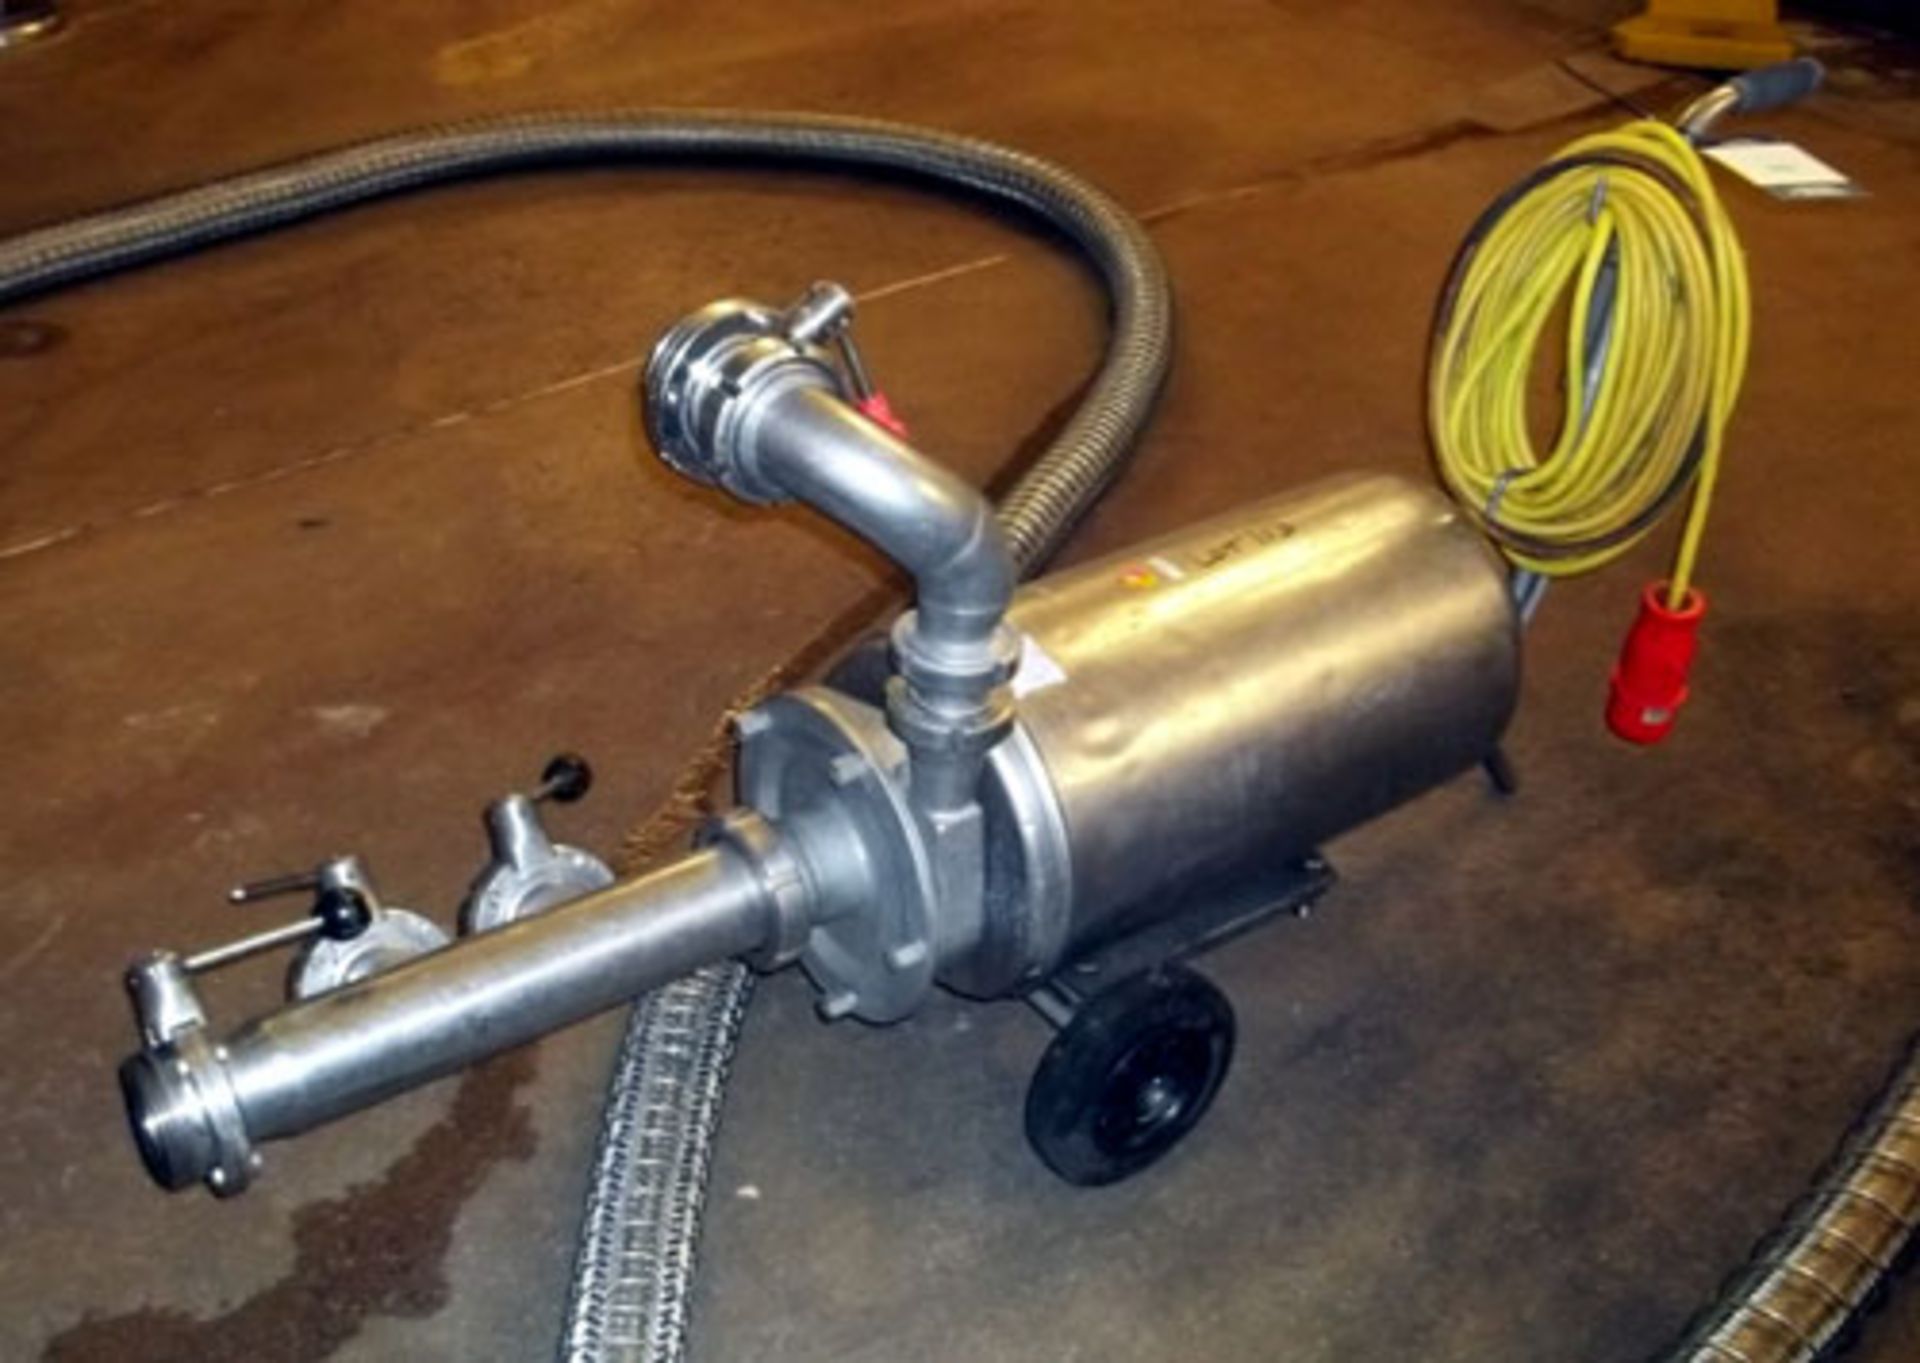 Fristam Portable Centrifugal Pump, Model FP742, Stainless Steel. Serial# 42126035. (Dismantling